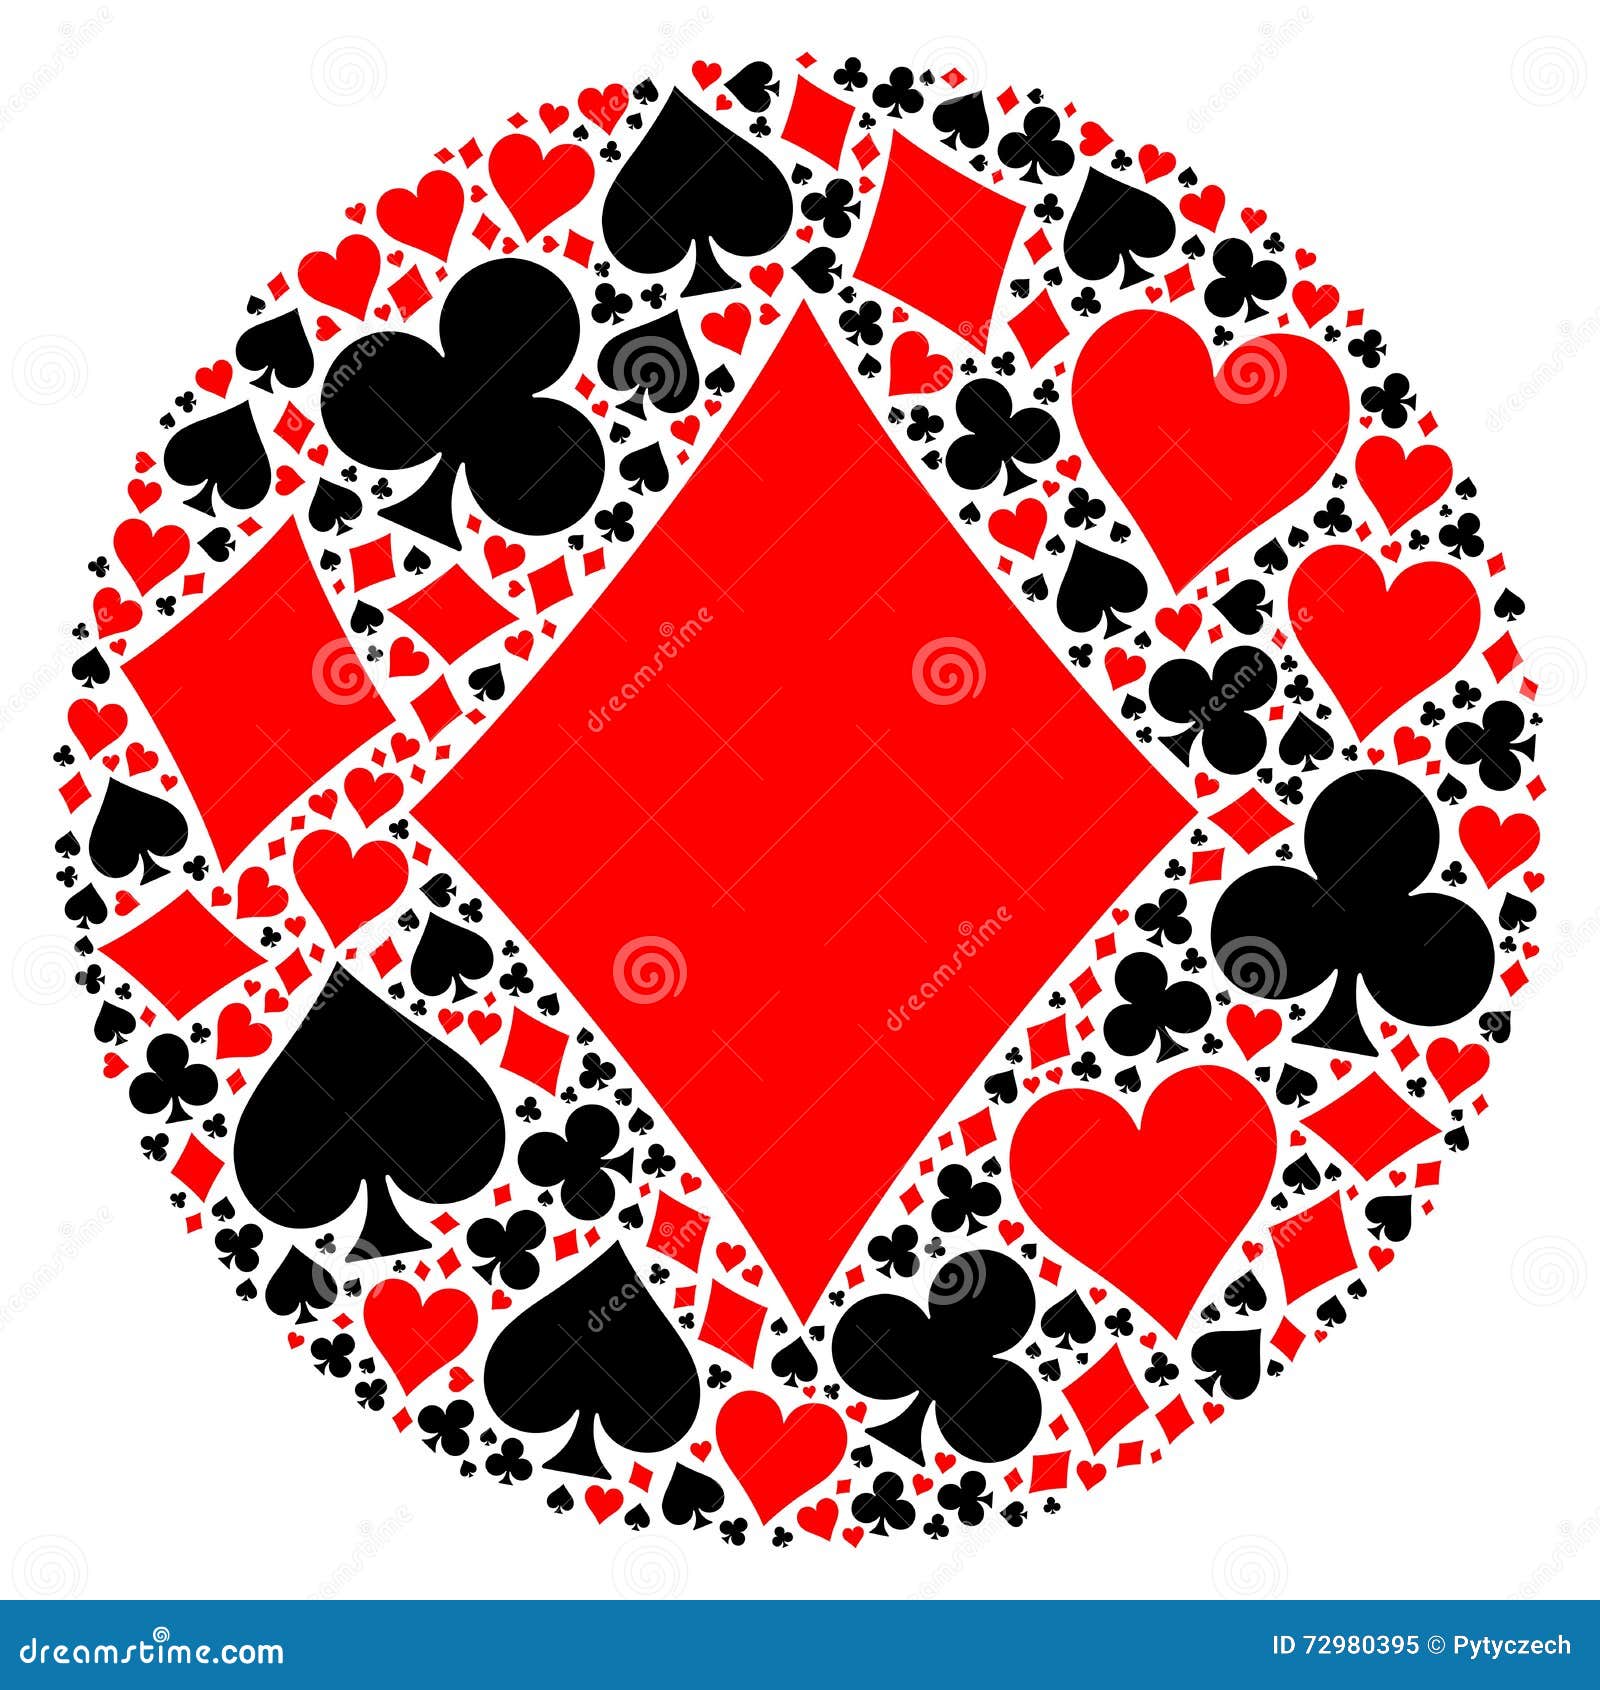 Playing card suit icons Royalty Free Vector Image